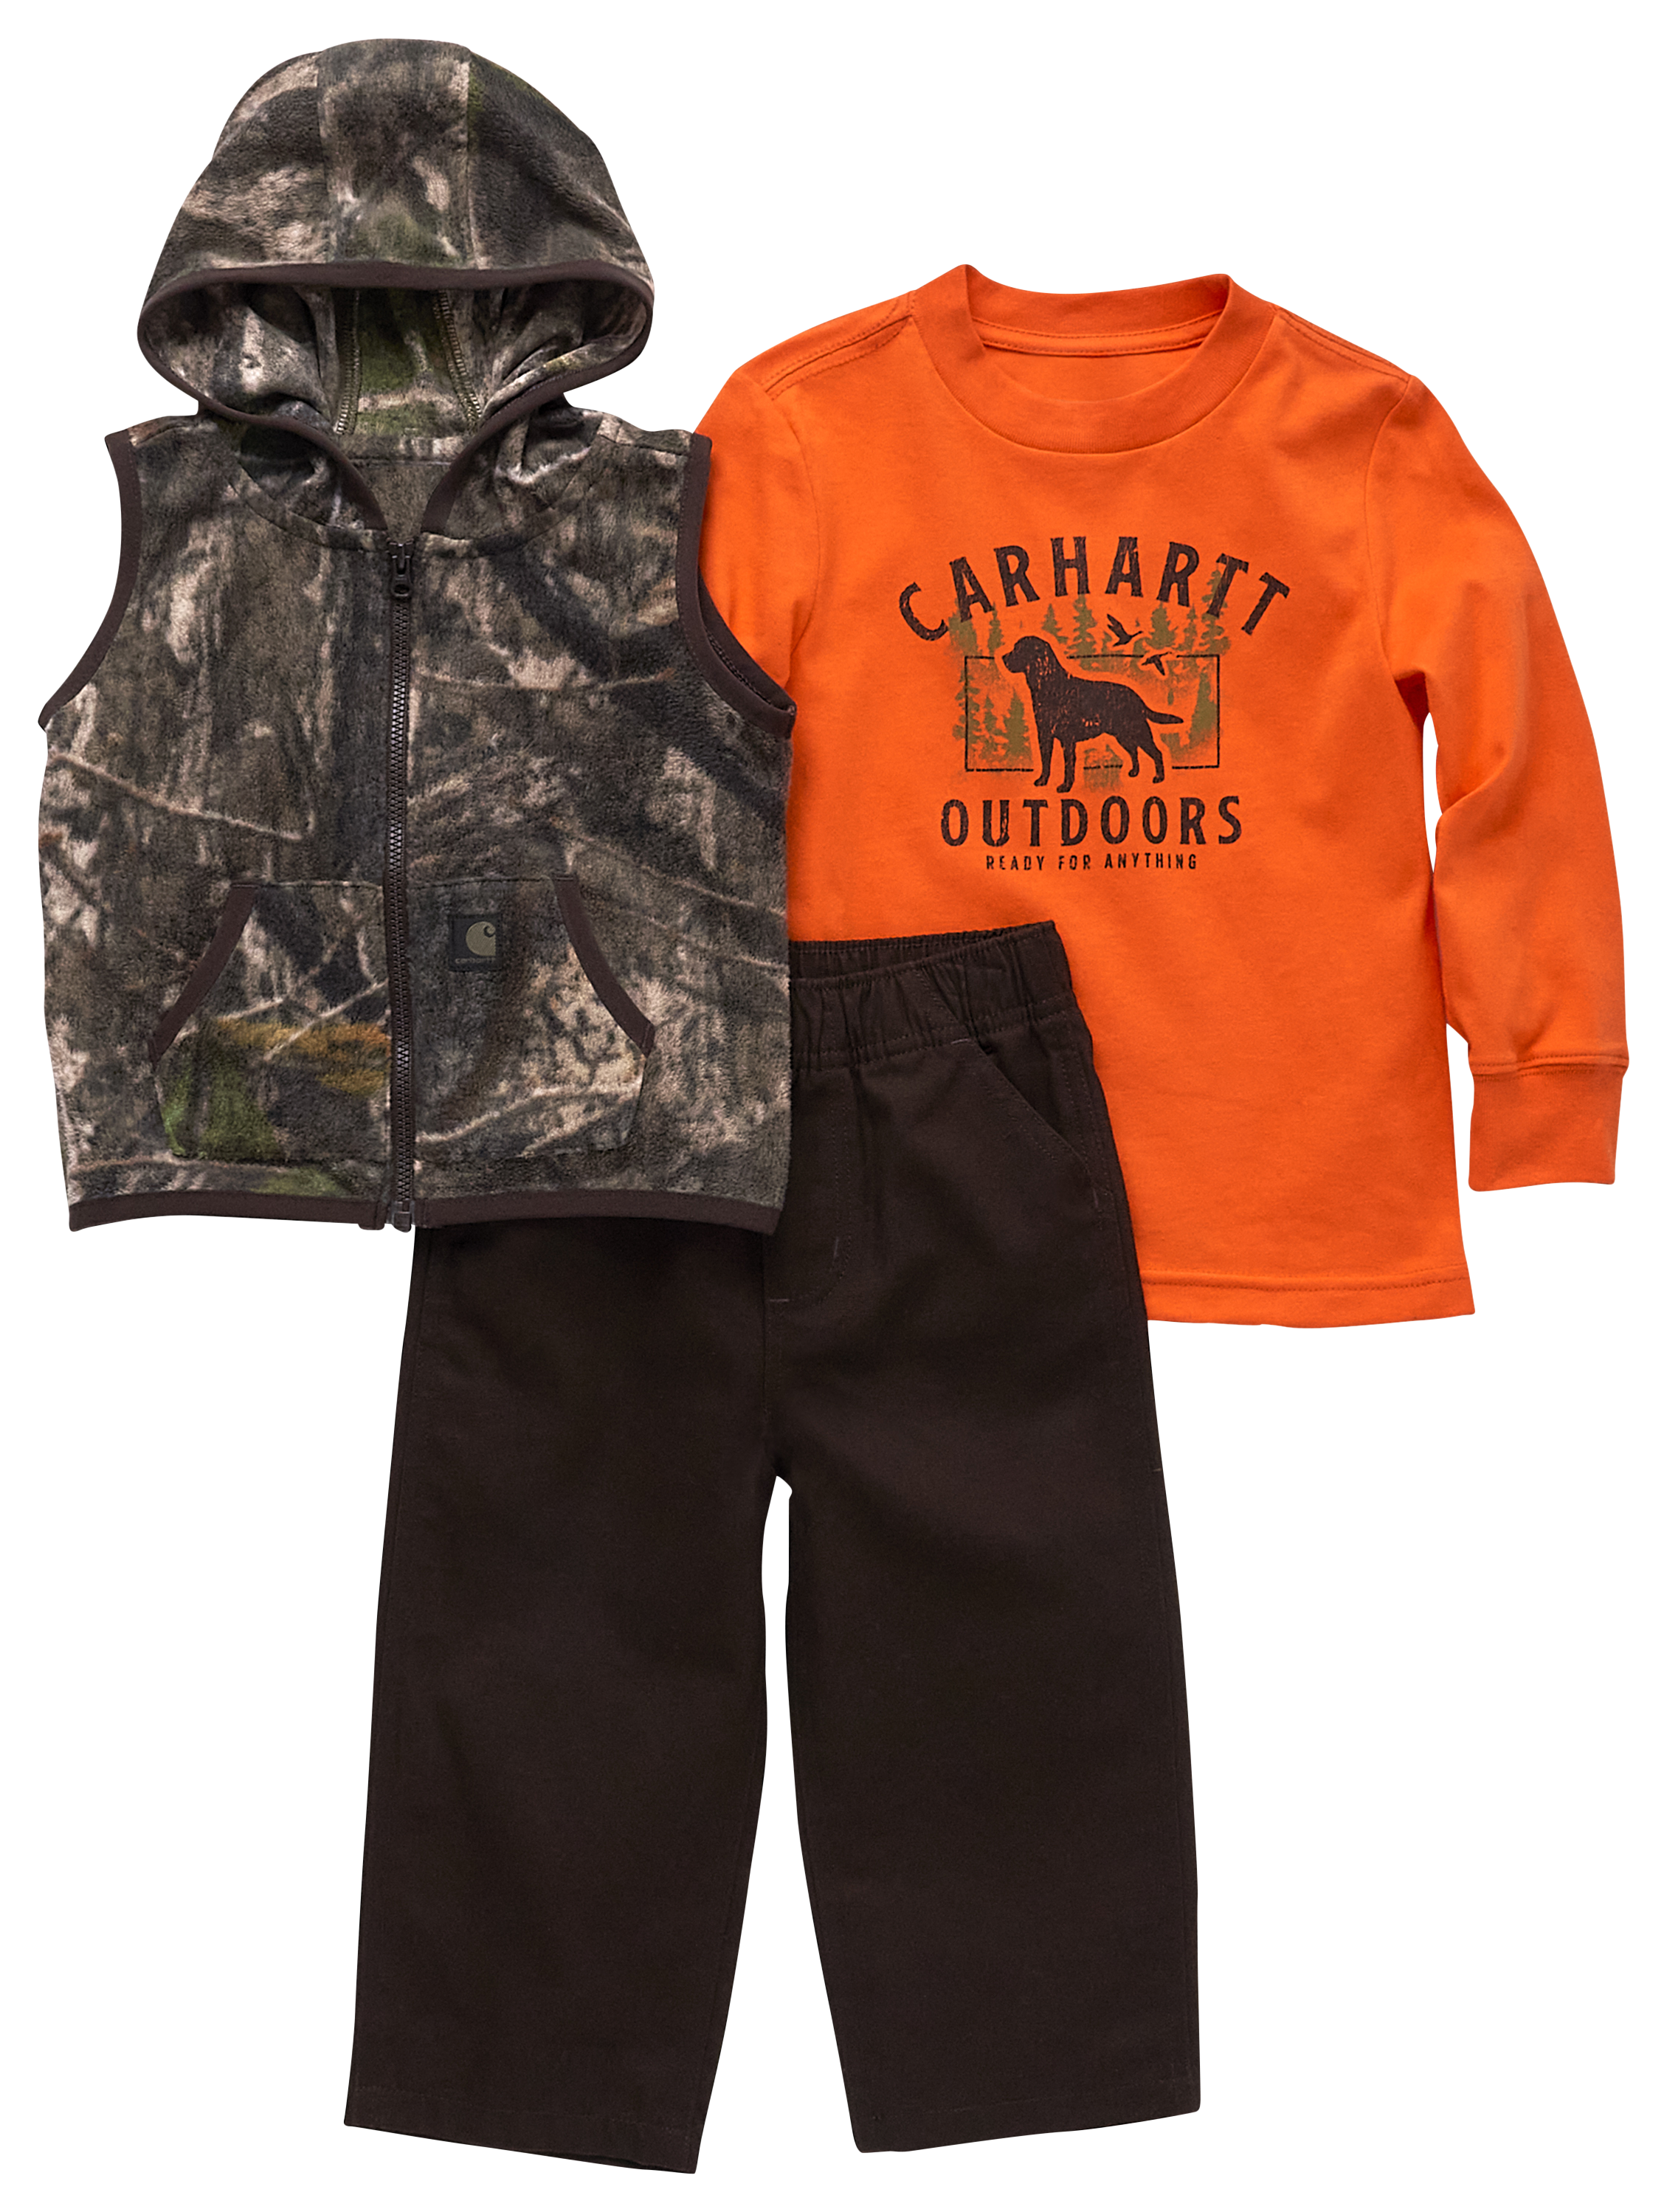 Carhartt Long-Sleeve T-Shirt, Camo Vest, and Canvas Pants 3-Piece Set for Babies - Mossy Oak Country DNA - 18 Months